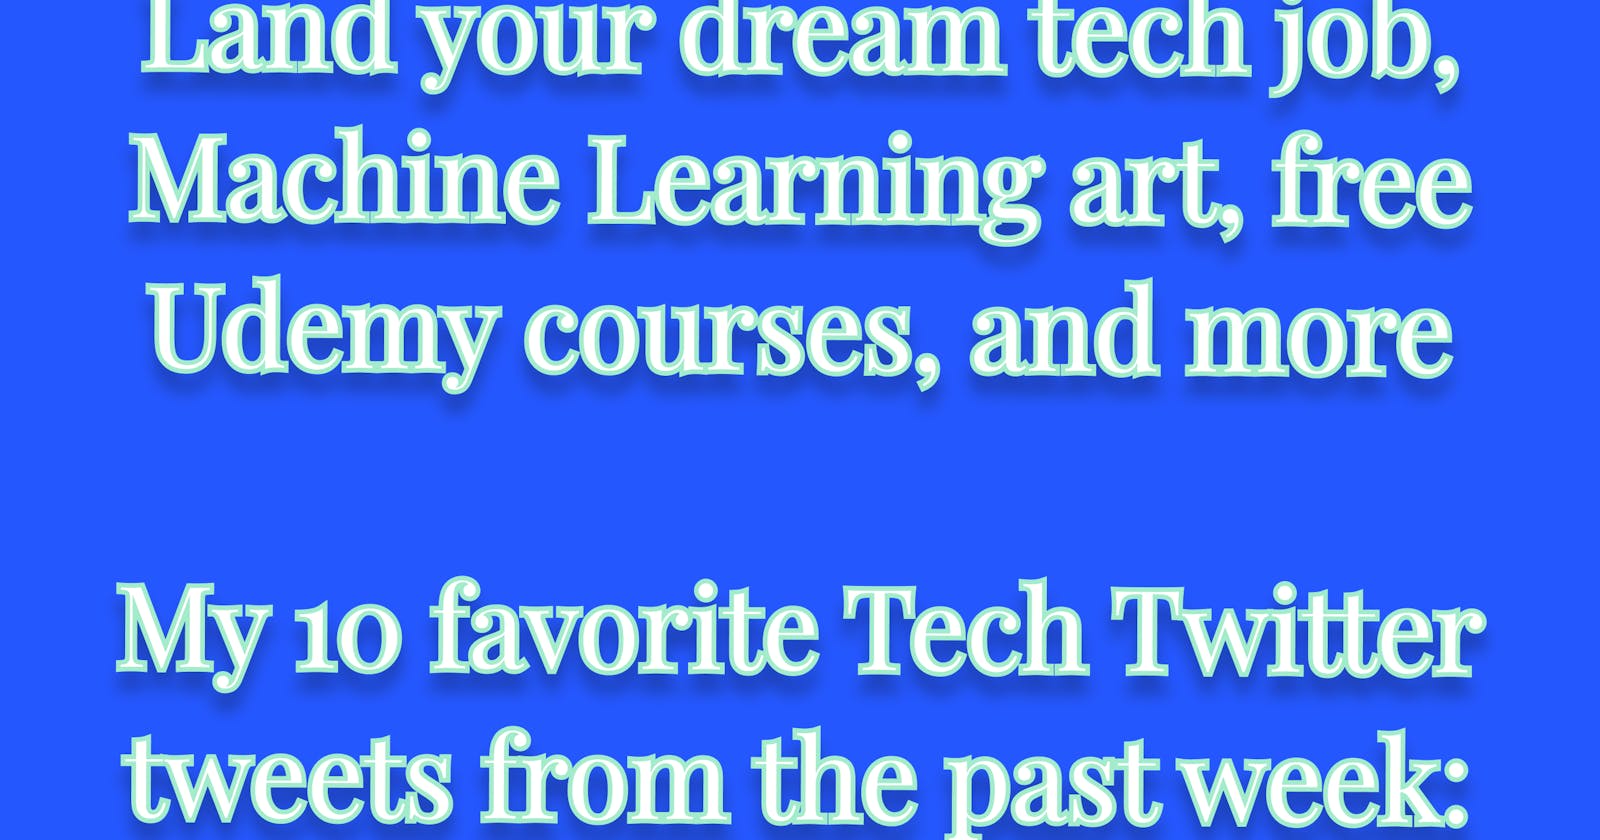 Land your dream tech job,  Machine Learning art, free Udemy courses, and more

My 10 favorite Tech Twitter tweets from the past week: